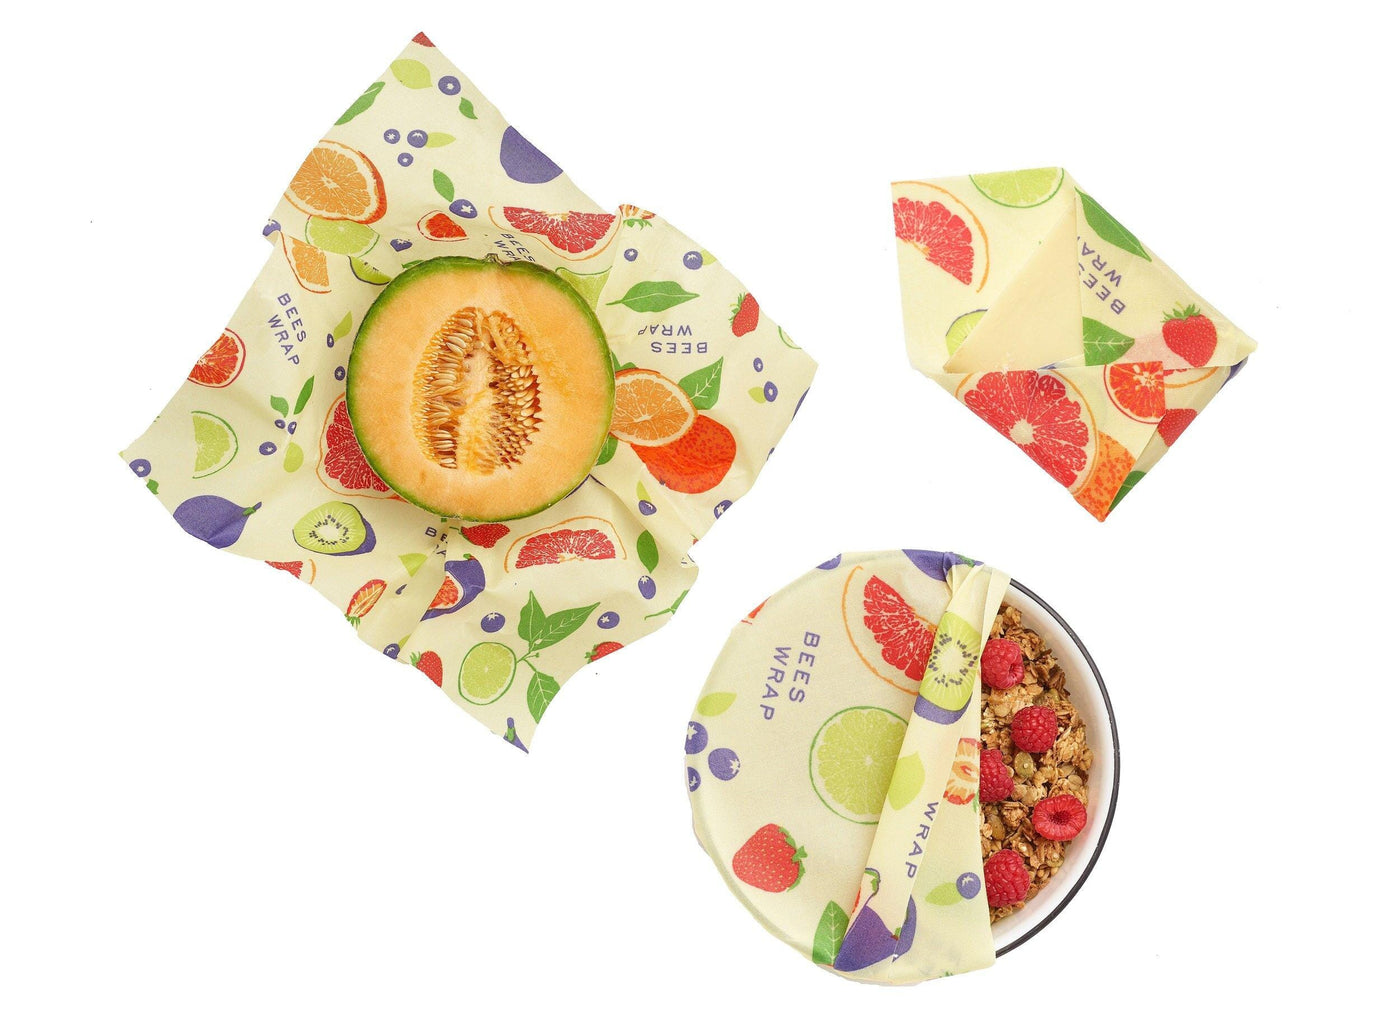 Bee's Wrap® Assorted 3 Pack Beeswax Wraps